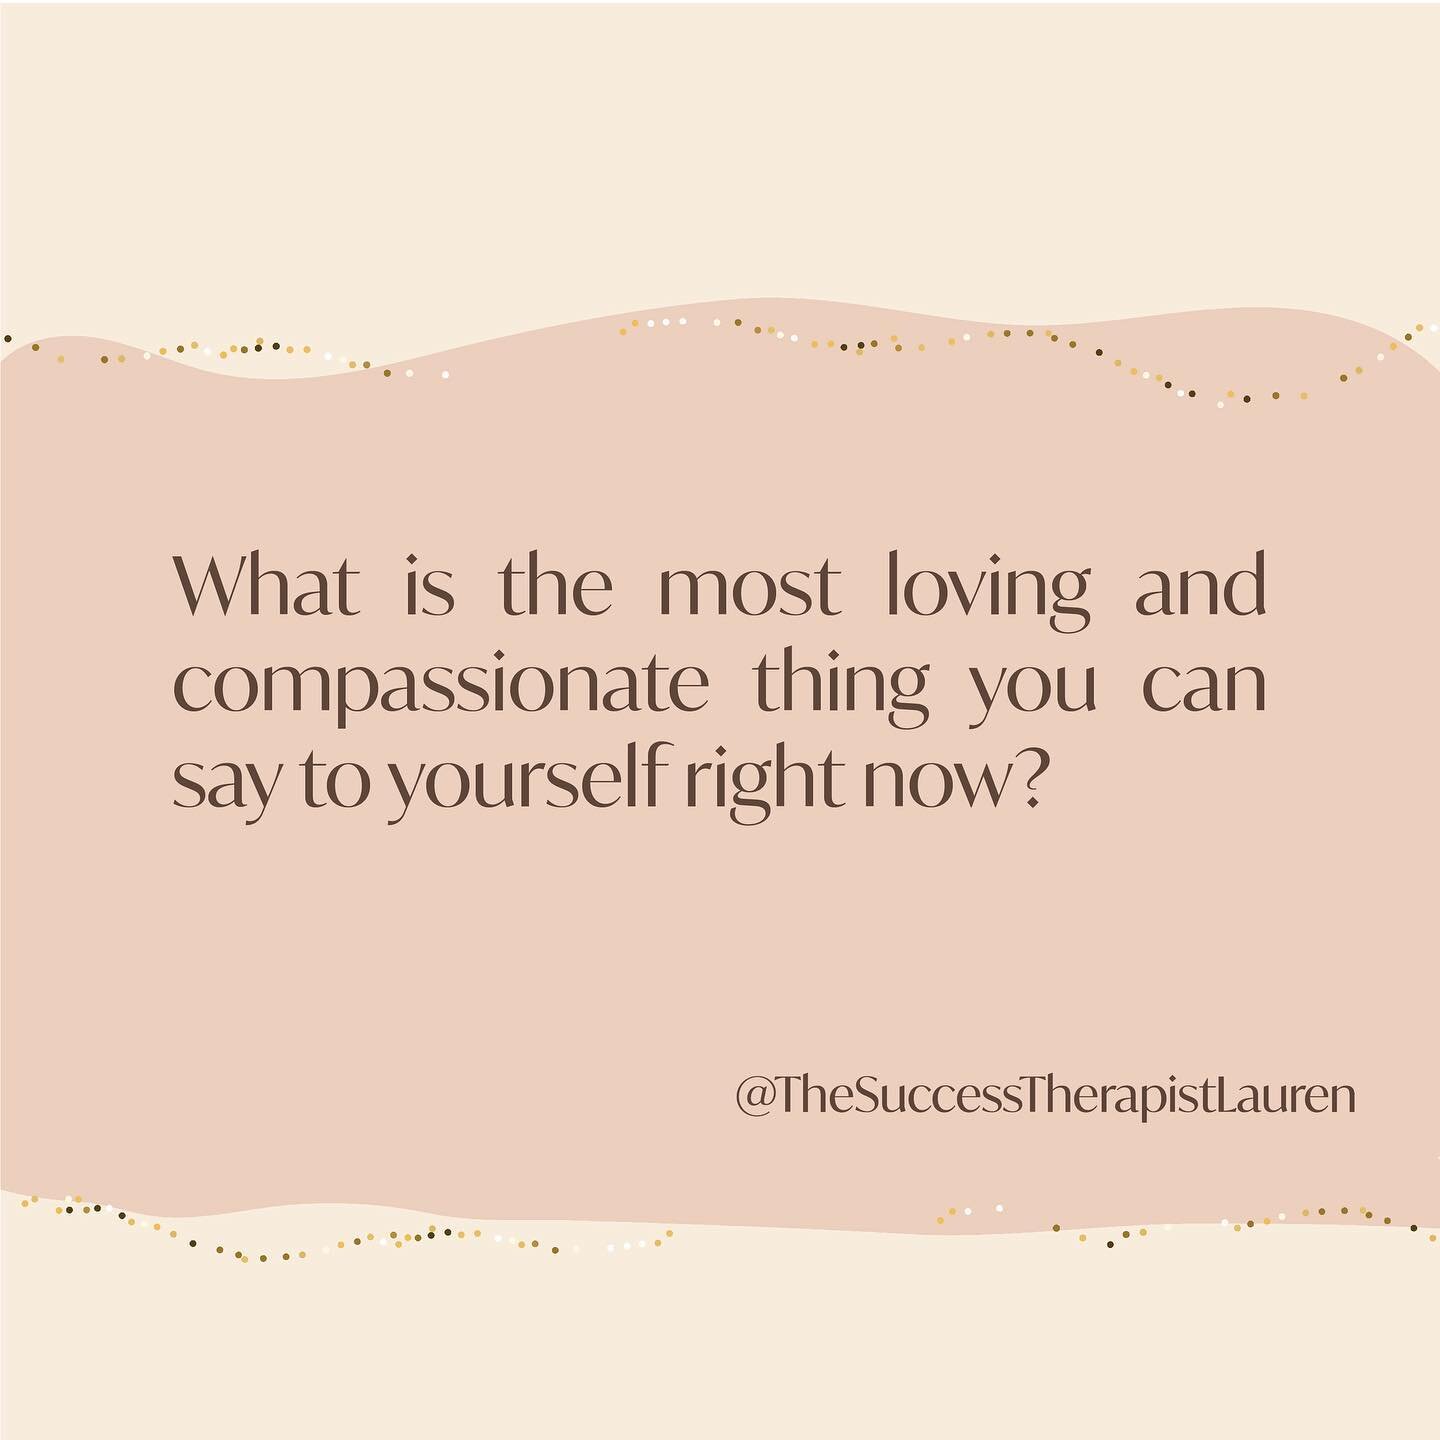 Challenge of the day: What is the most loving and compassionate thing you can say to yourself right now?

#selfcompassion #challengeoftheday #therapistsofinstagram #therapy #positivemindset #therapyrocks #positiveselftalk